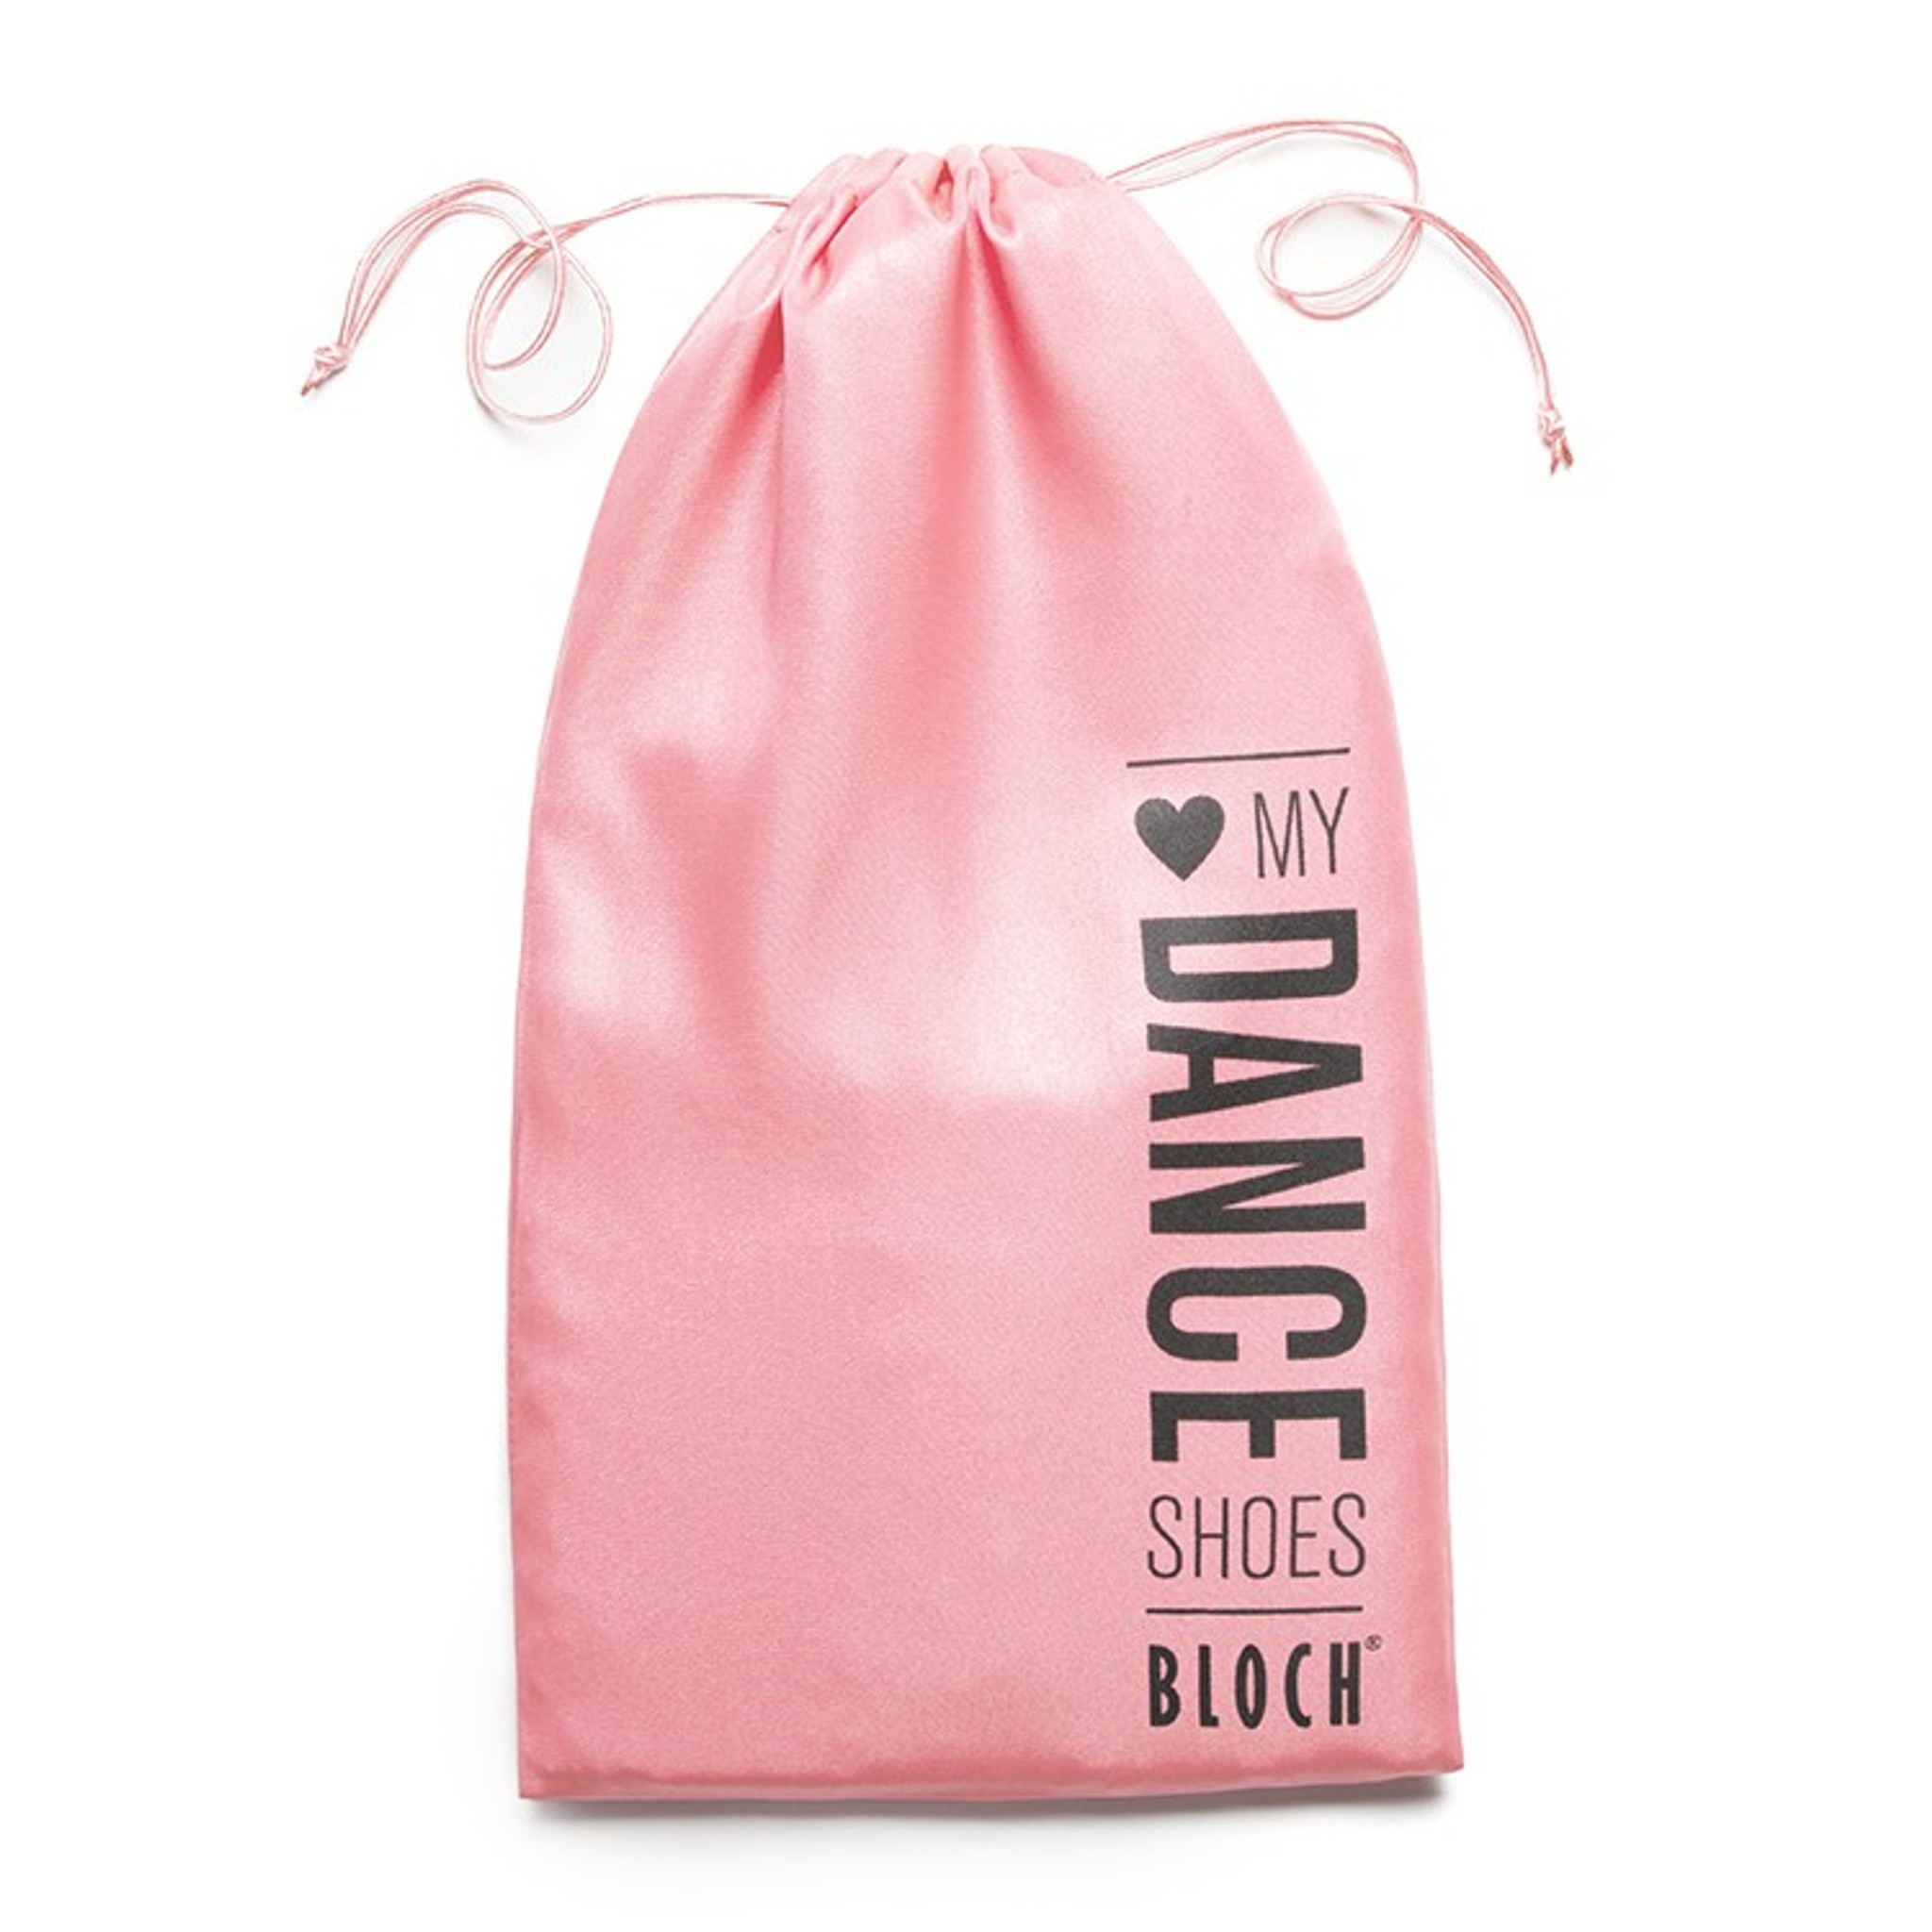 Bloch Love My Shoes Bag - Baby Pink - DANCE DIRECT®